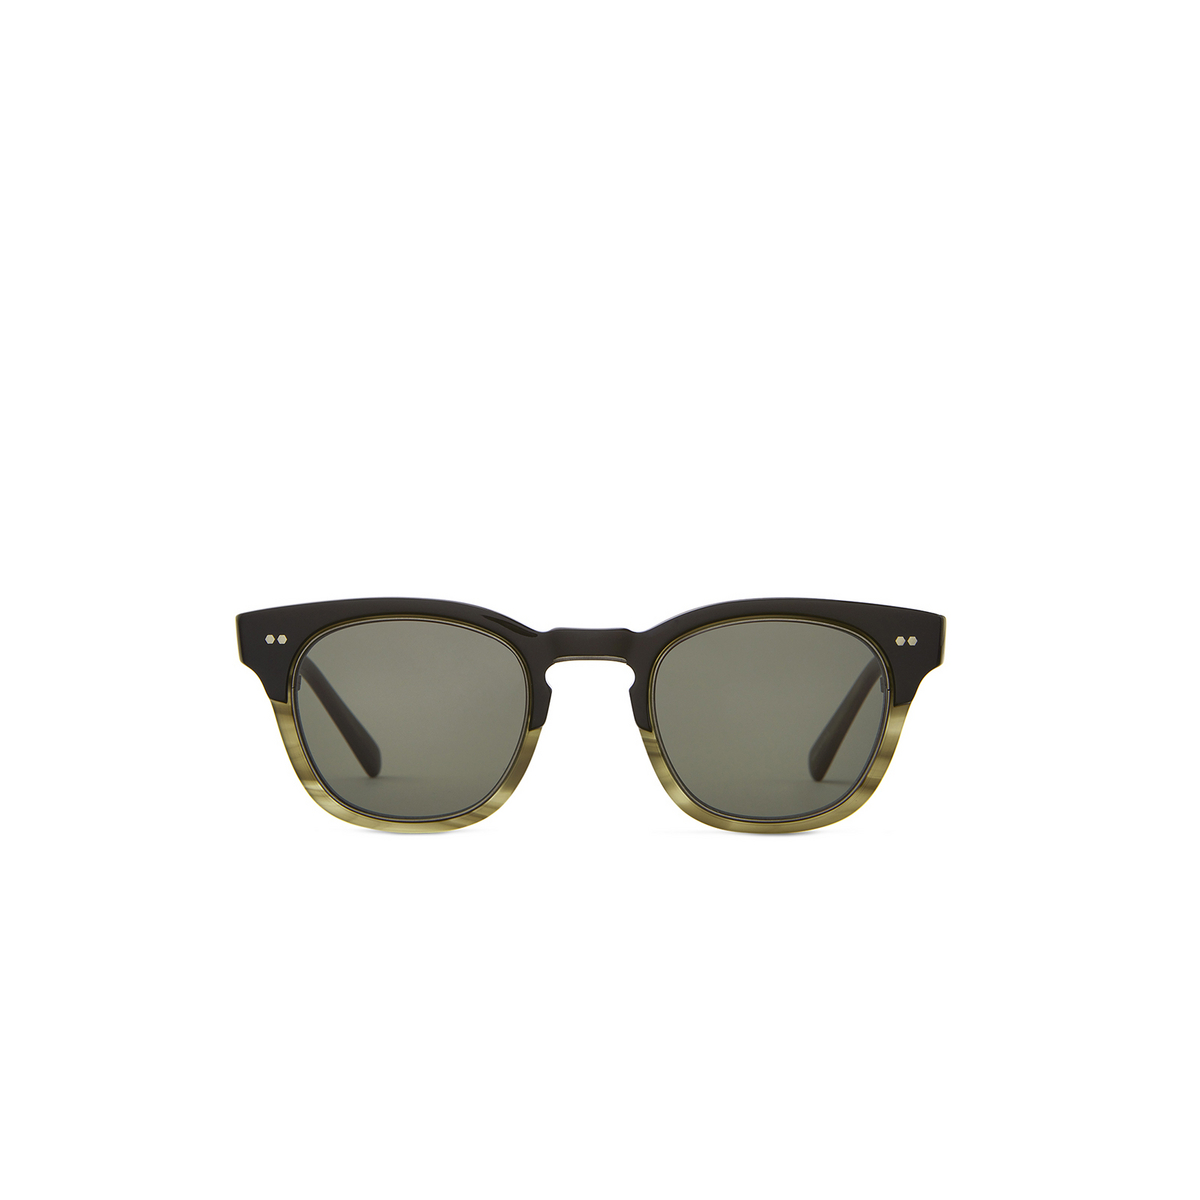 Mr. Leight HANALEI II S Sunglasses SYCL-PW/G15 Sycamore Laminate-Pewter - front view